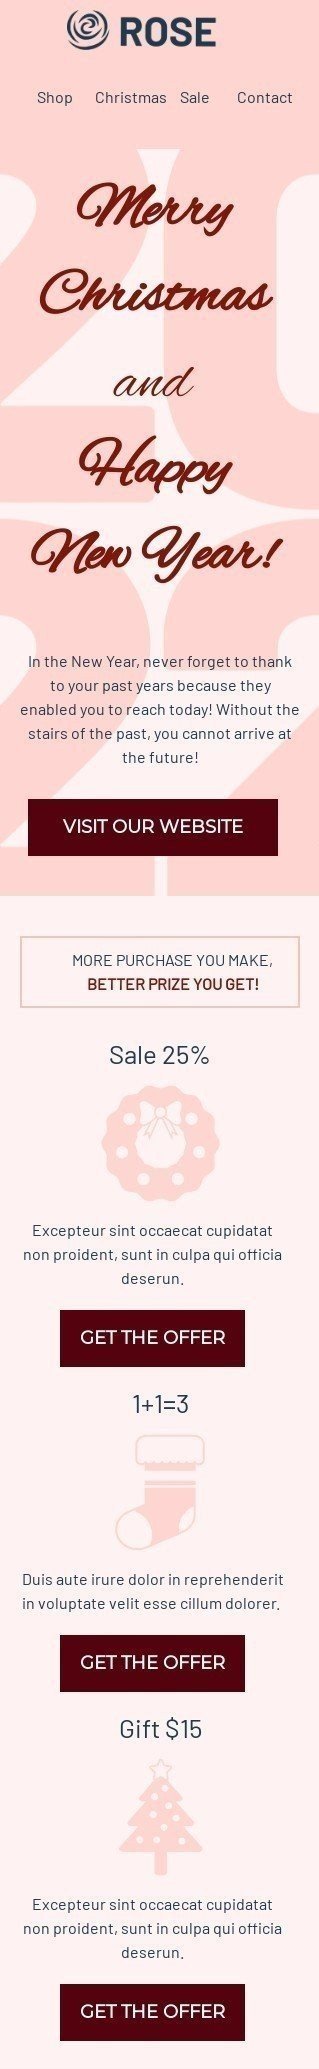 Christmas Email Template "Make more purchases" for Fashion industry mobile view